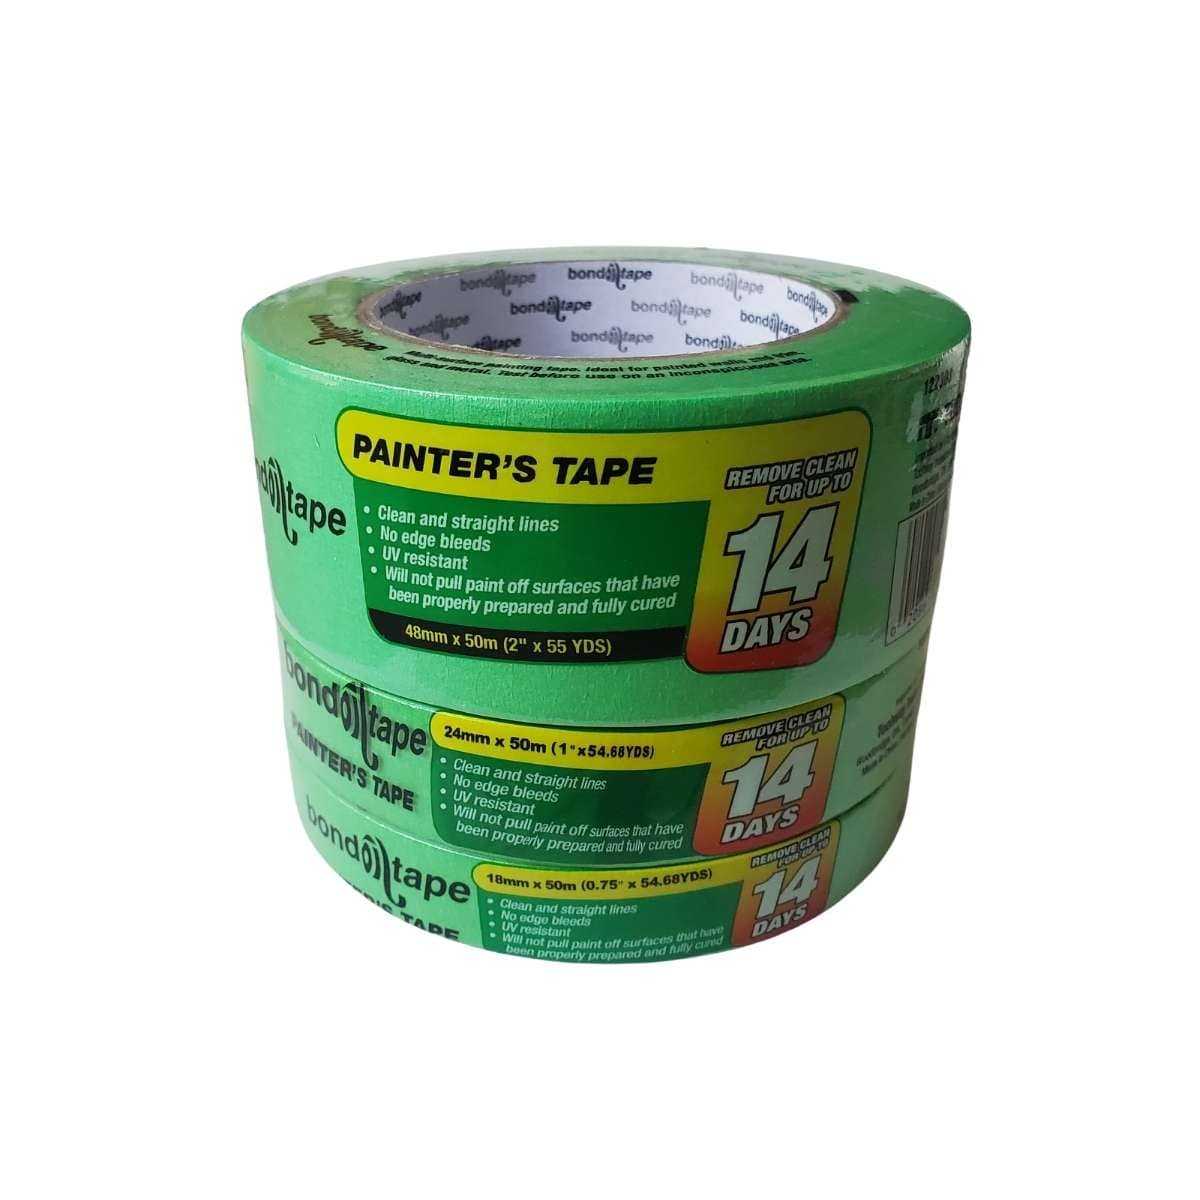 Toolway Painter's Tape Bond Tape - Painter's Tape - 18mm x 50m Roll - Item #122300